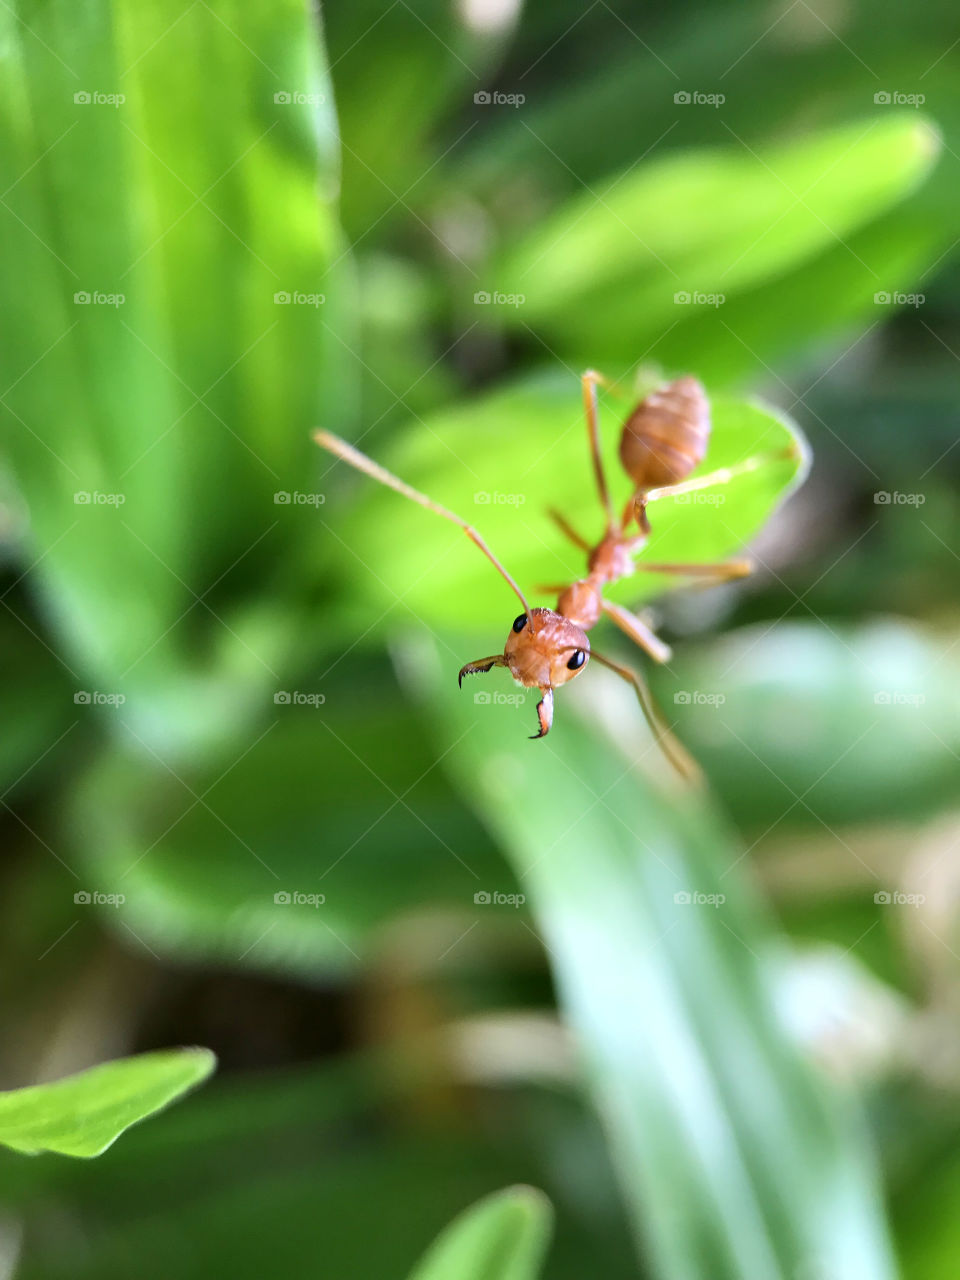 An ant who walk through the grass and was not afraid to face the camera